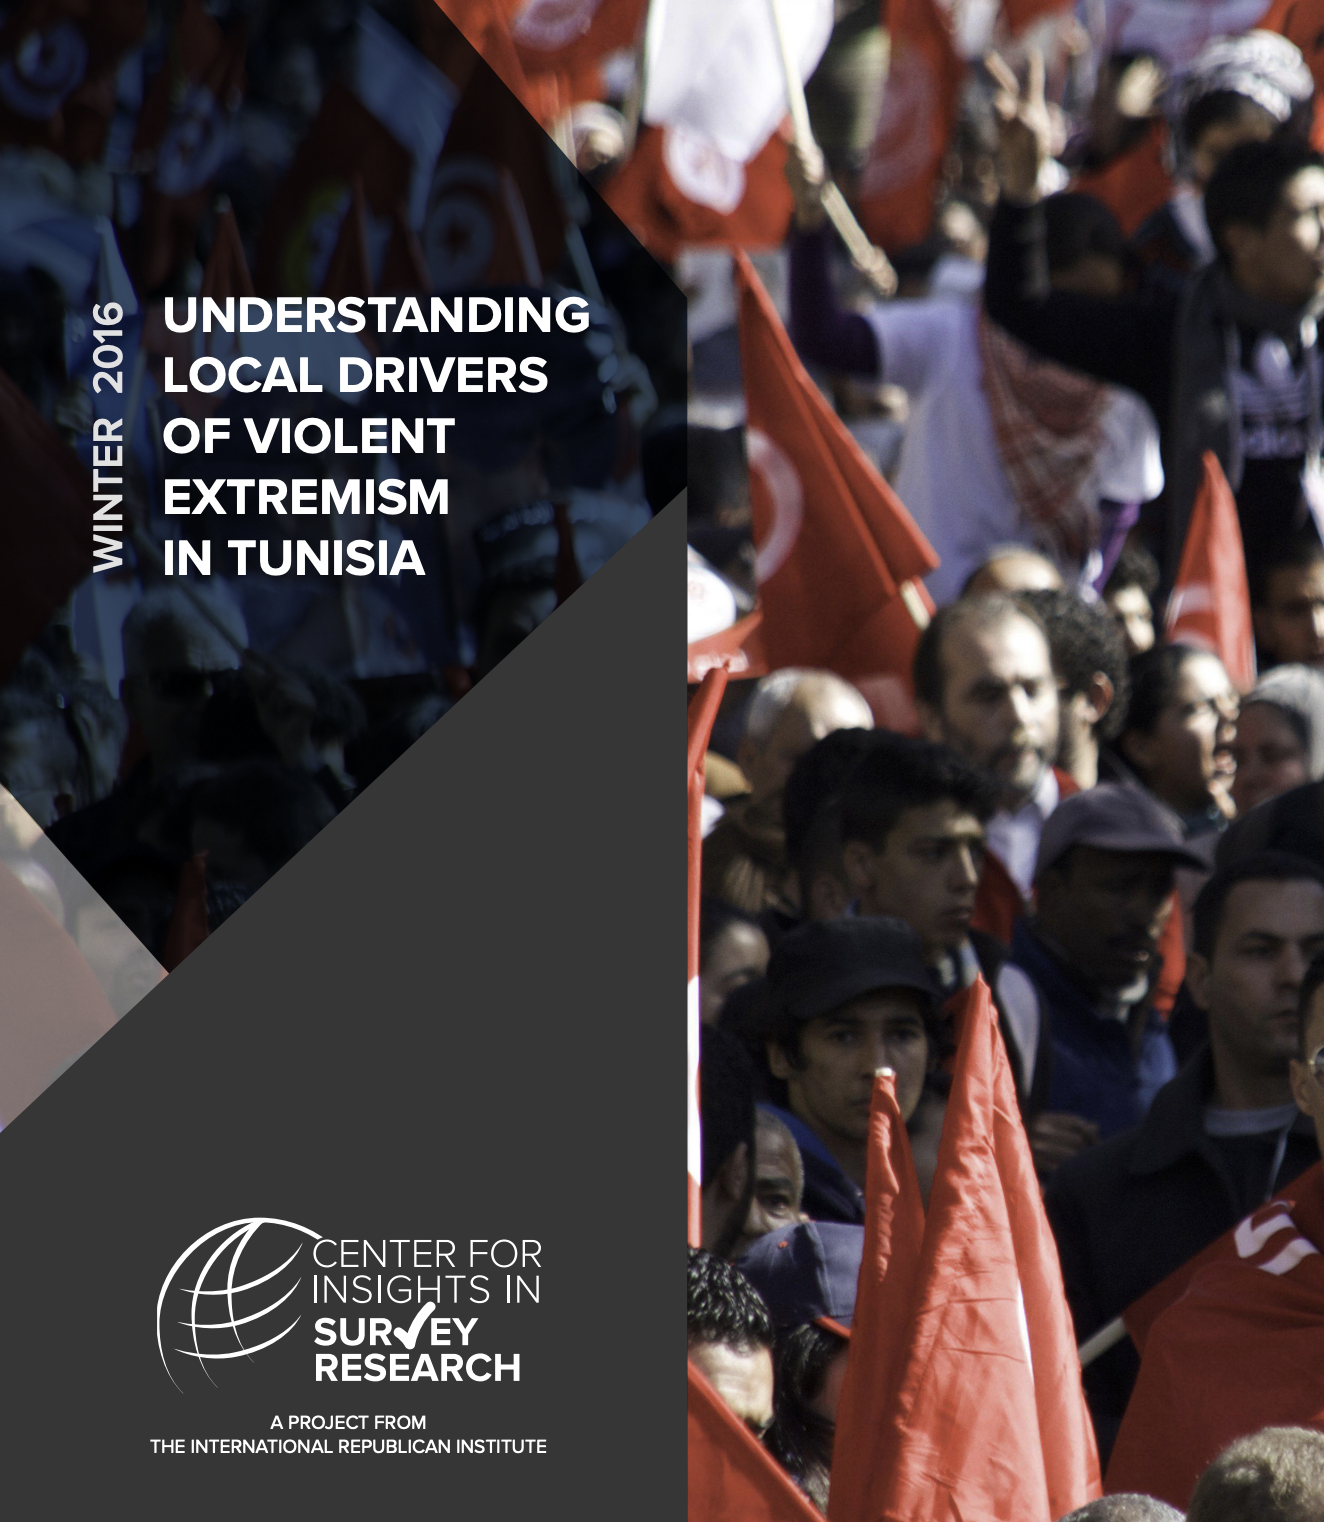 UNDERSTANDING LOCAL DRIVERS OF VIOLENT EXTREMISM IN TUNISIA